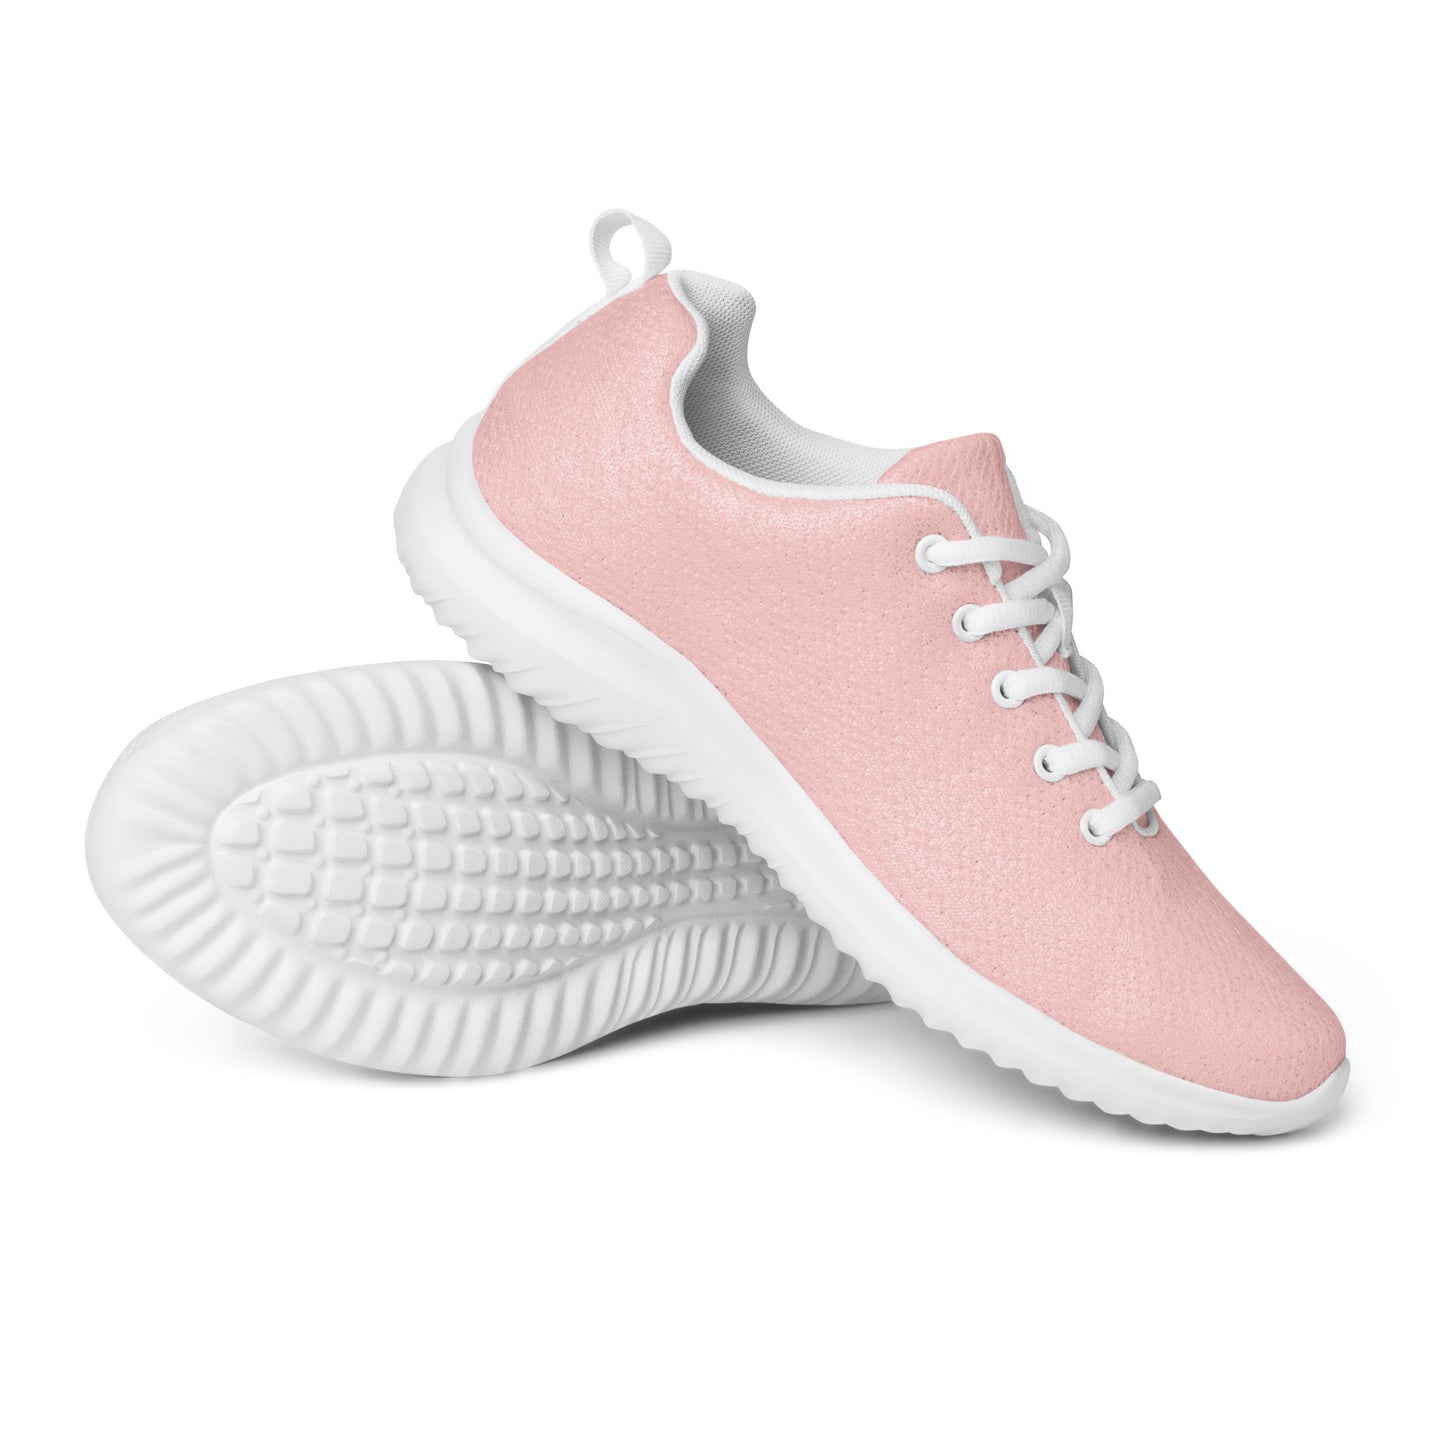 Women’s Cosmos Athletic Shoes